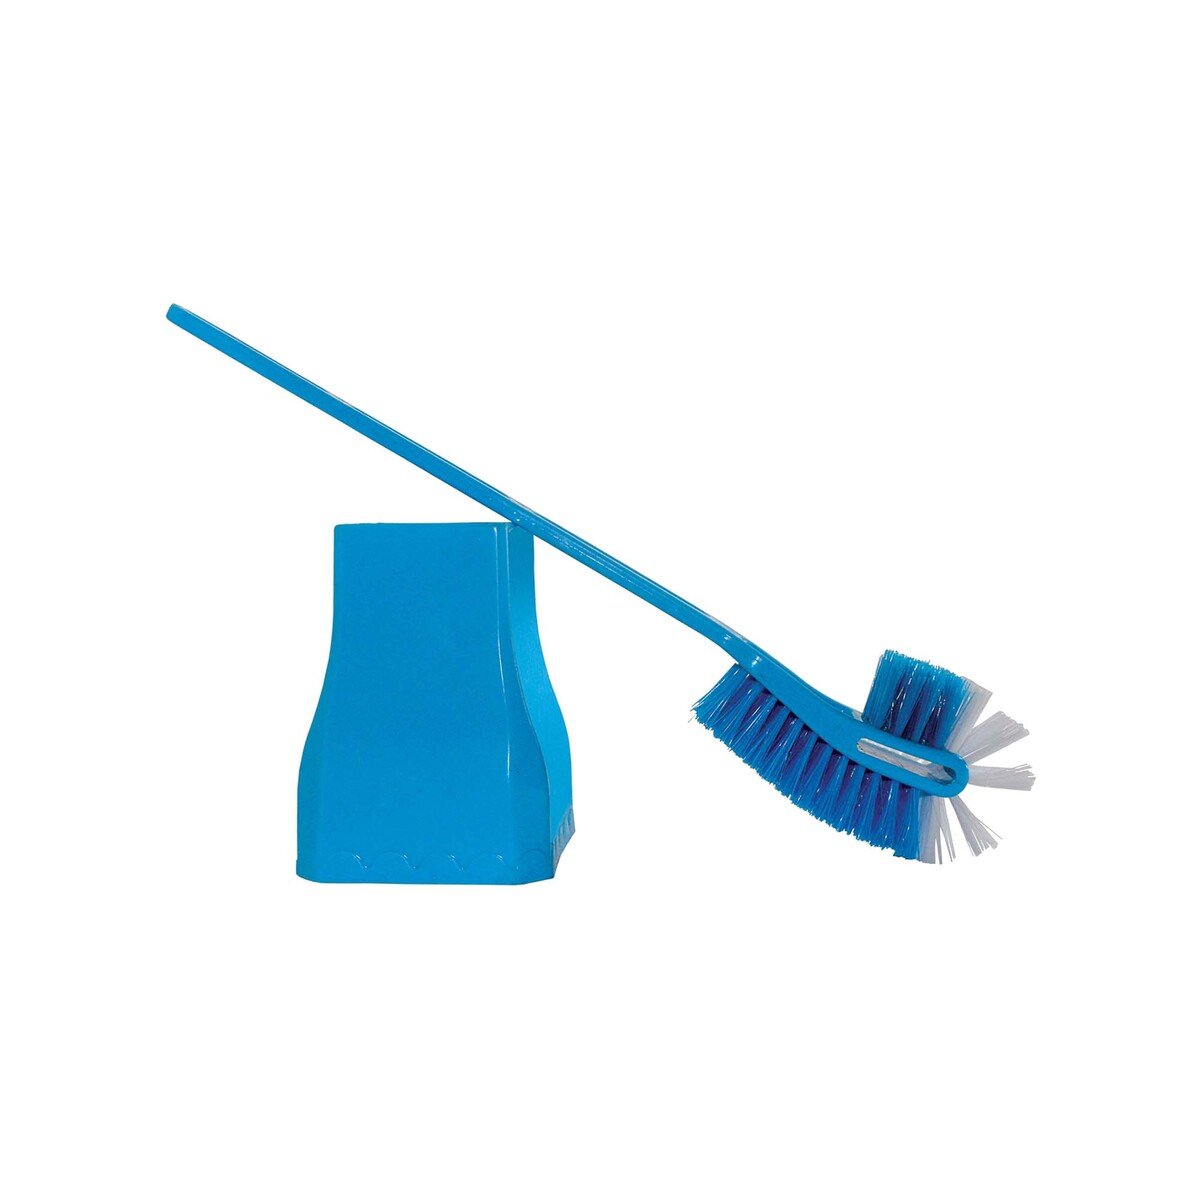 Gebi A-Star Toilet Brush with Container 419, 1 pc, Assorted Colors